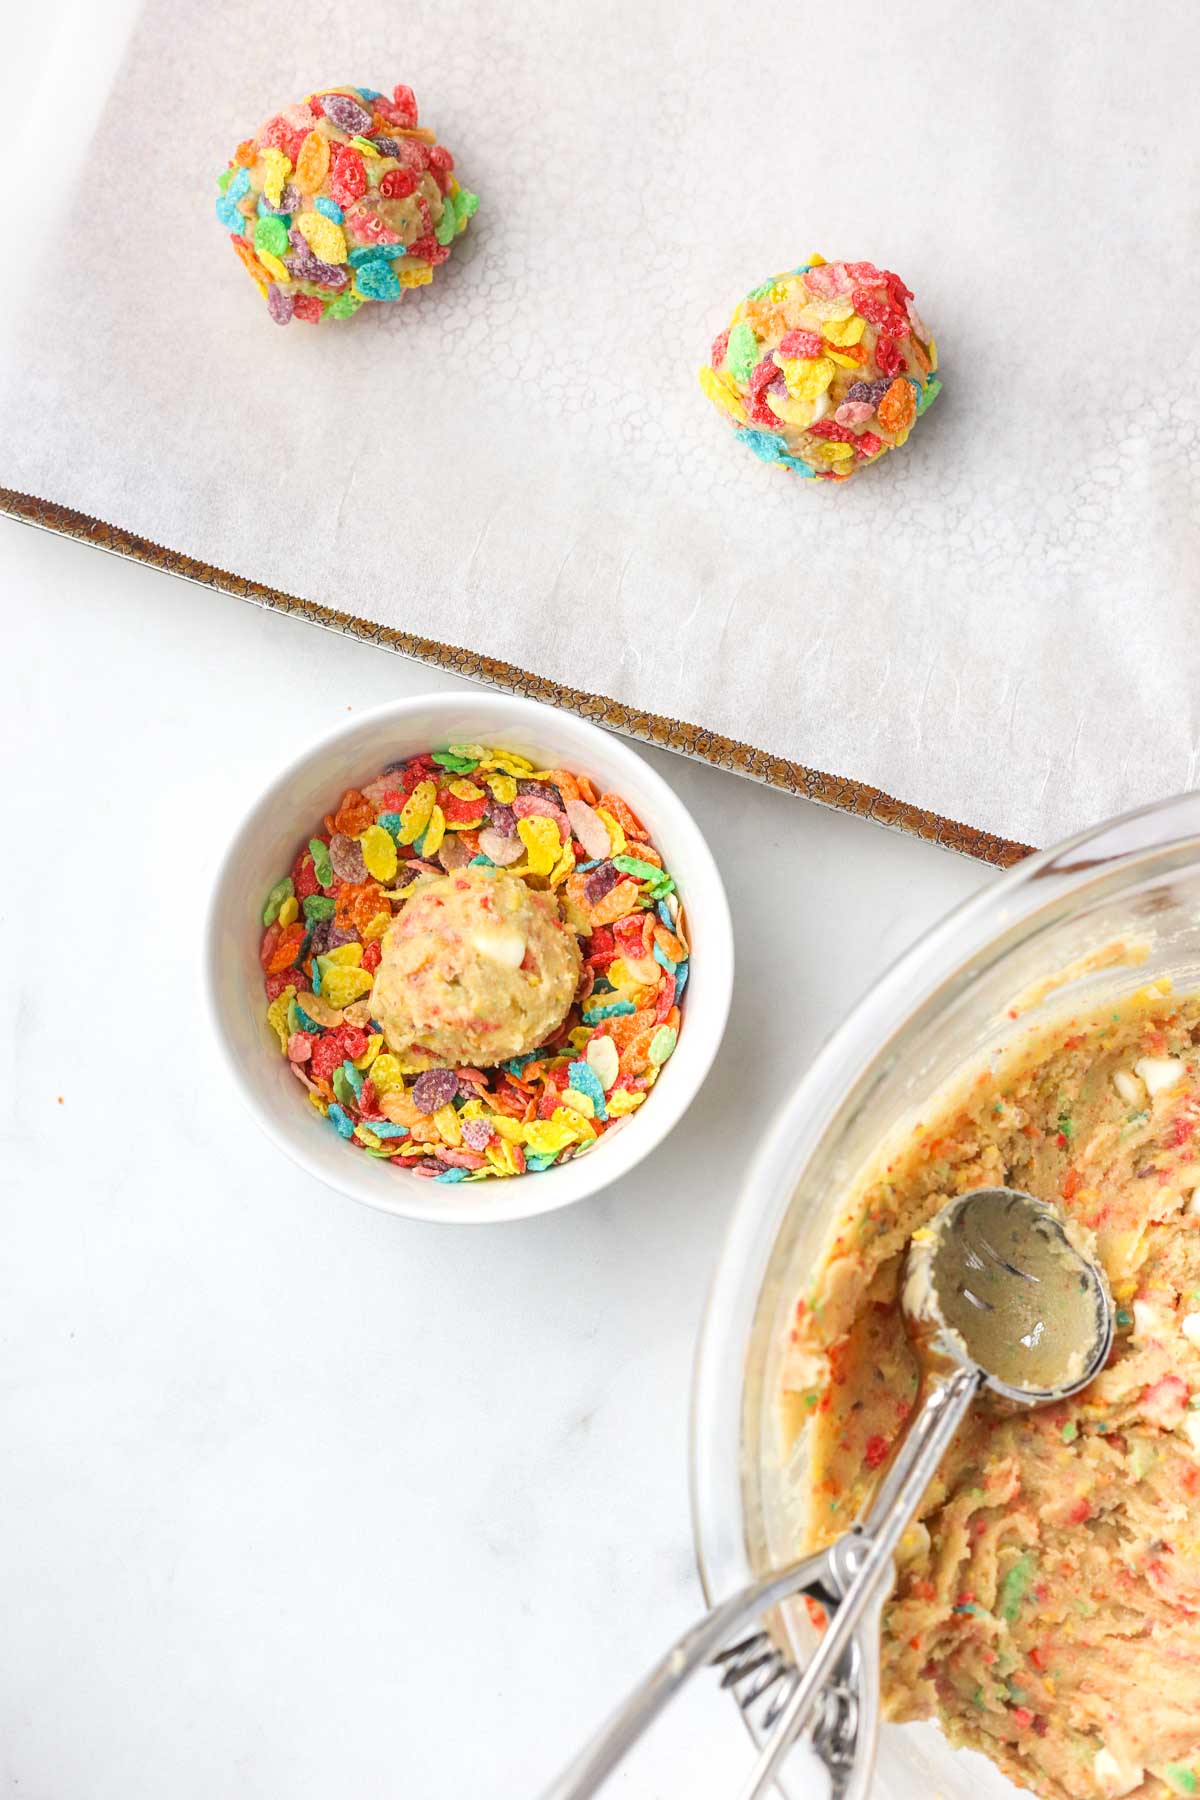 scooping cookie dough balls and rolling them in fruity pebbles cereal before placing them on the baking sheet.